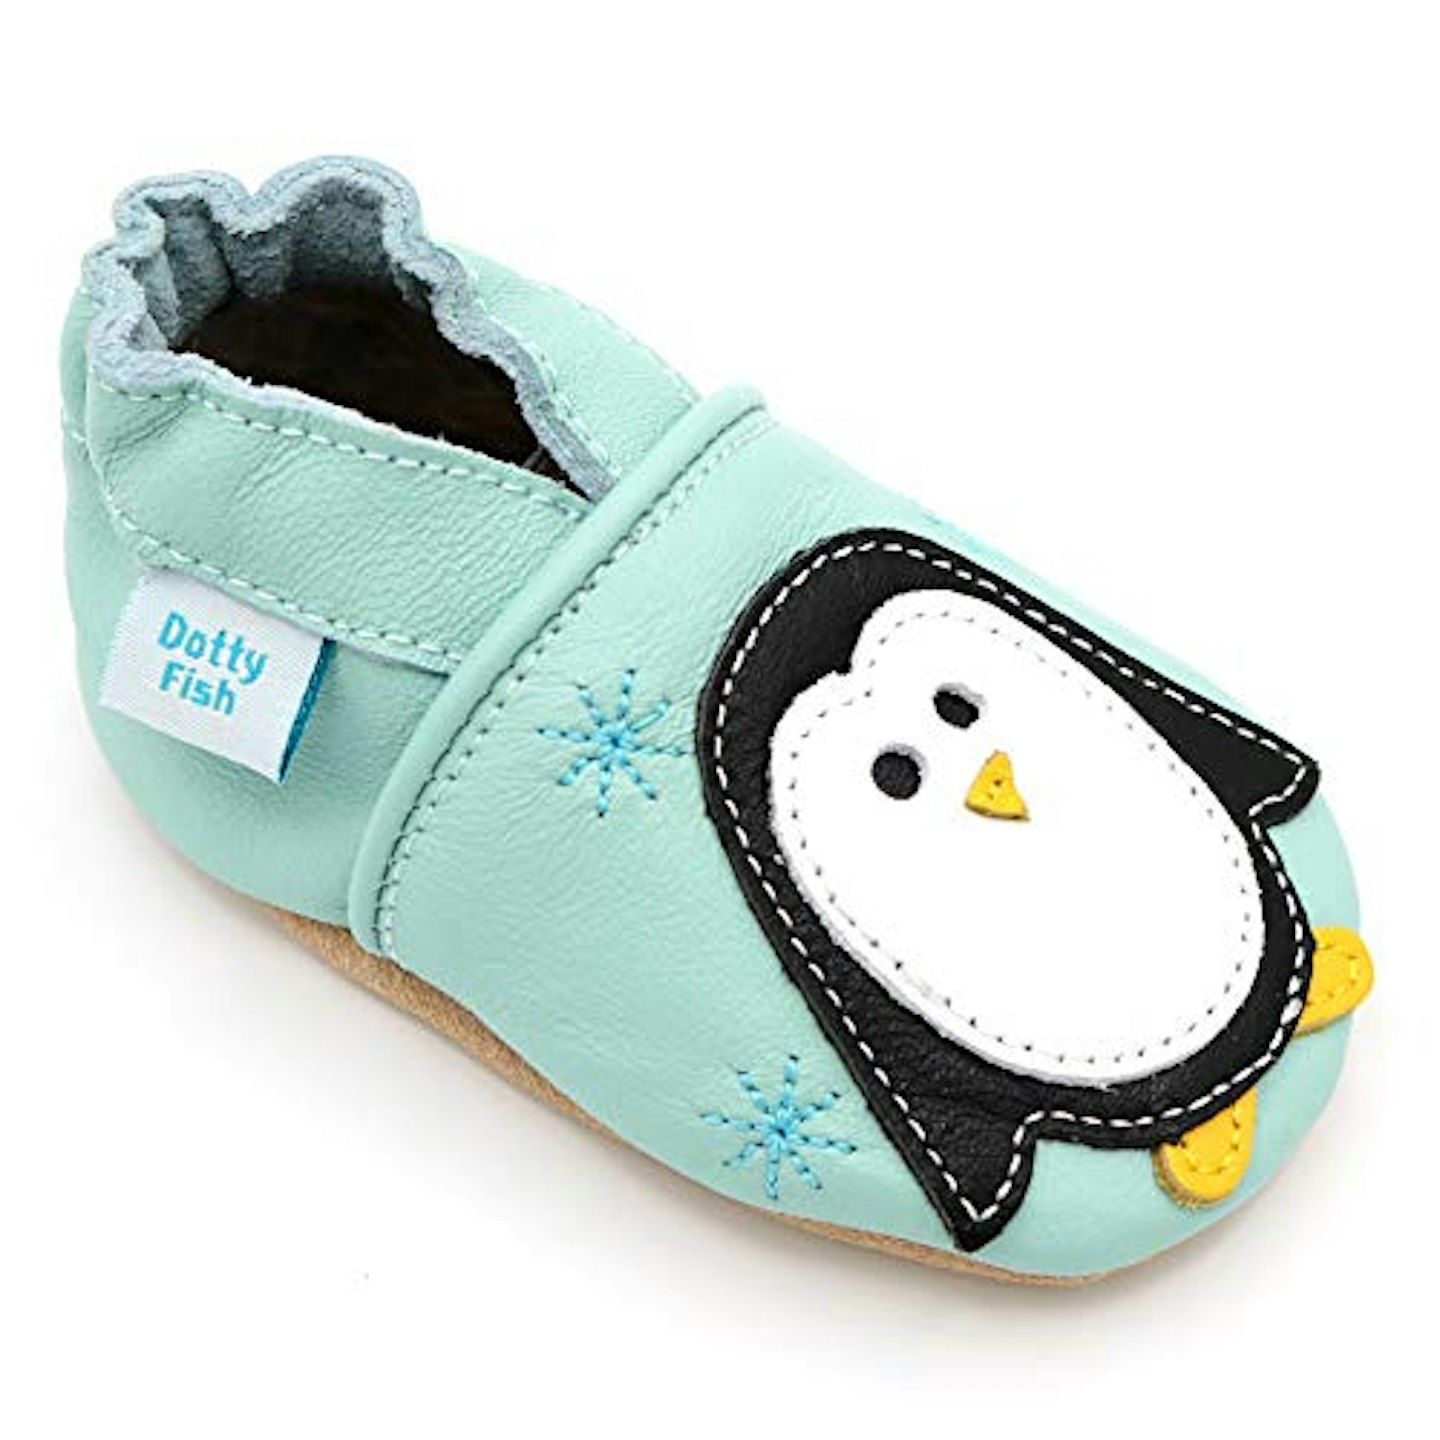 Dotty Fish Soft Leather Baby Shoes 